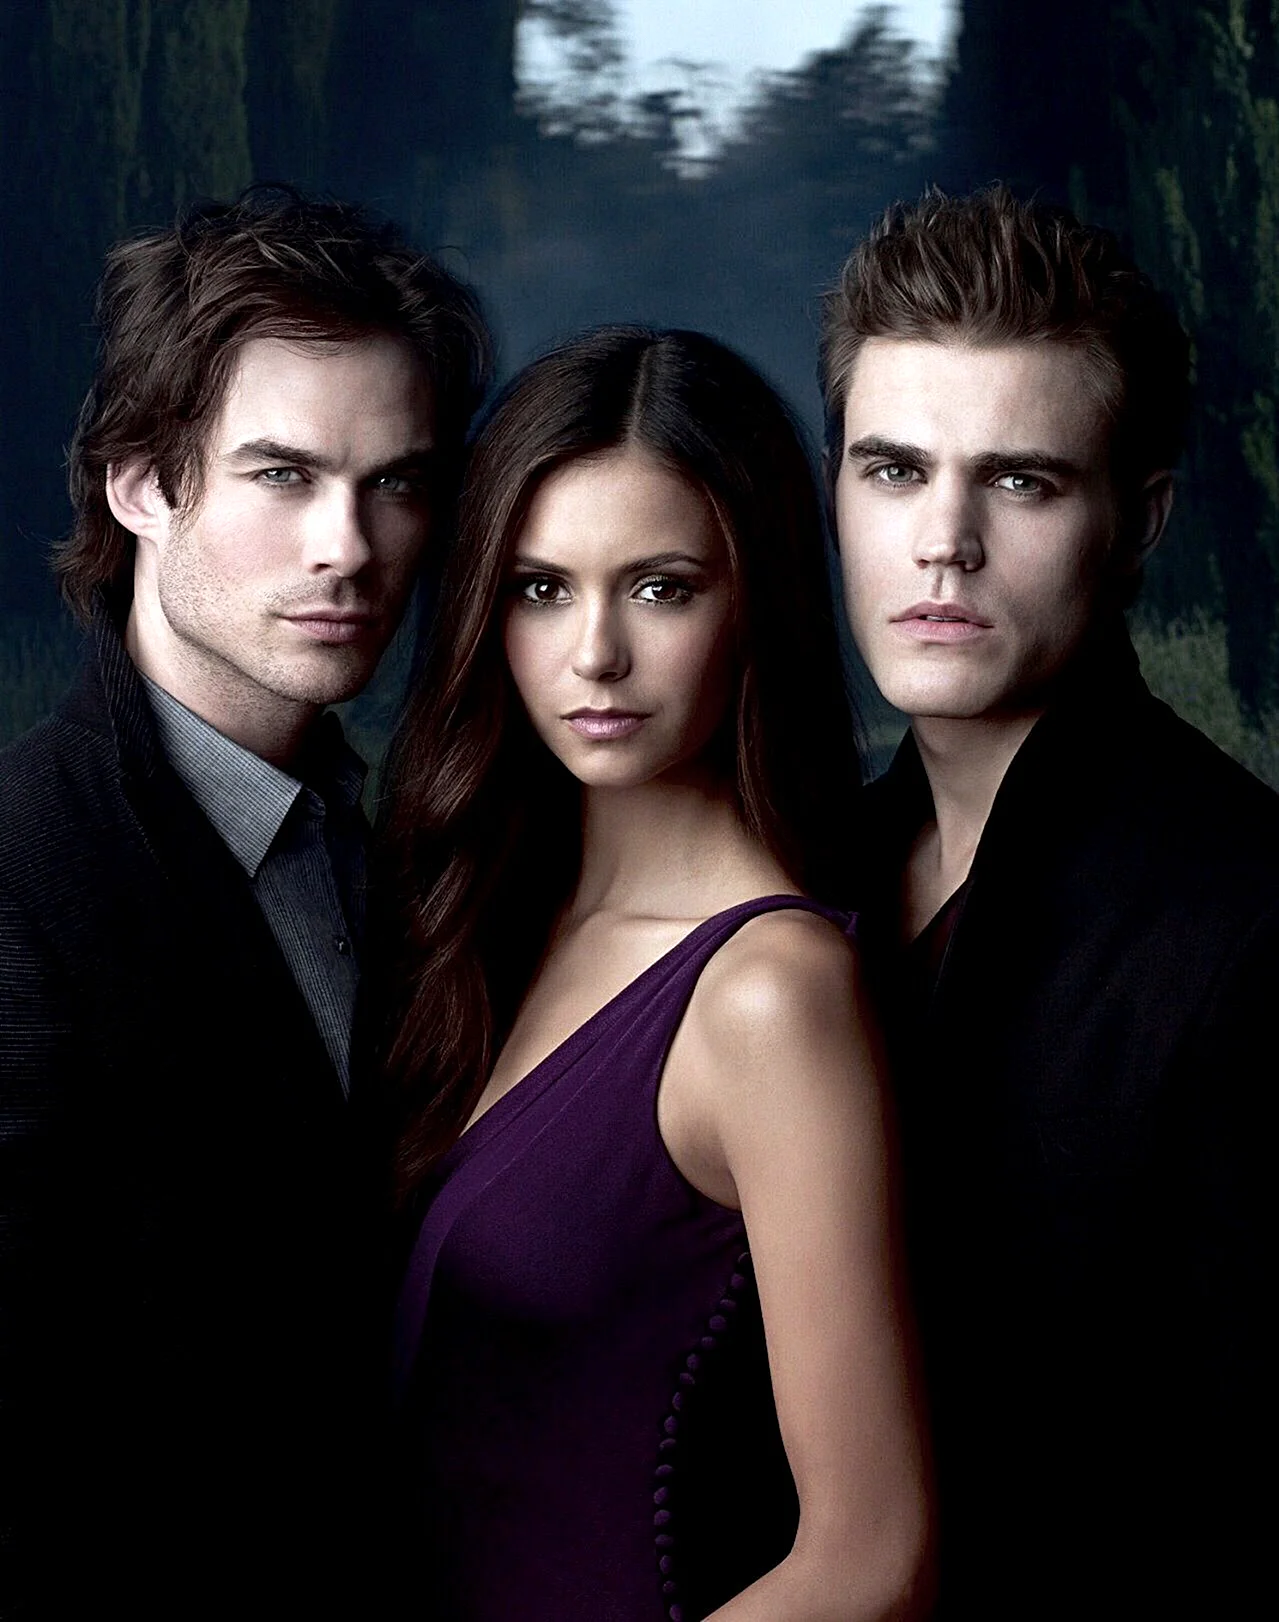 The Vampire Diaries Wallpaper For iPhone